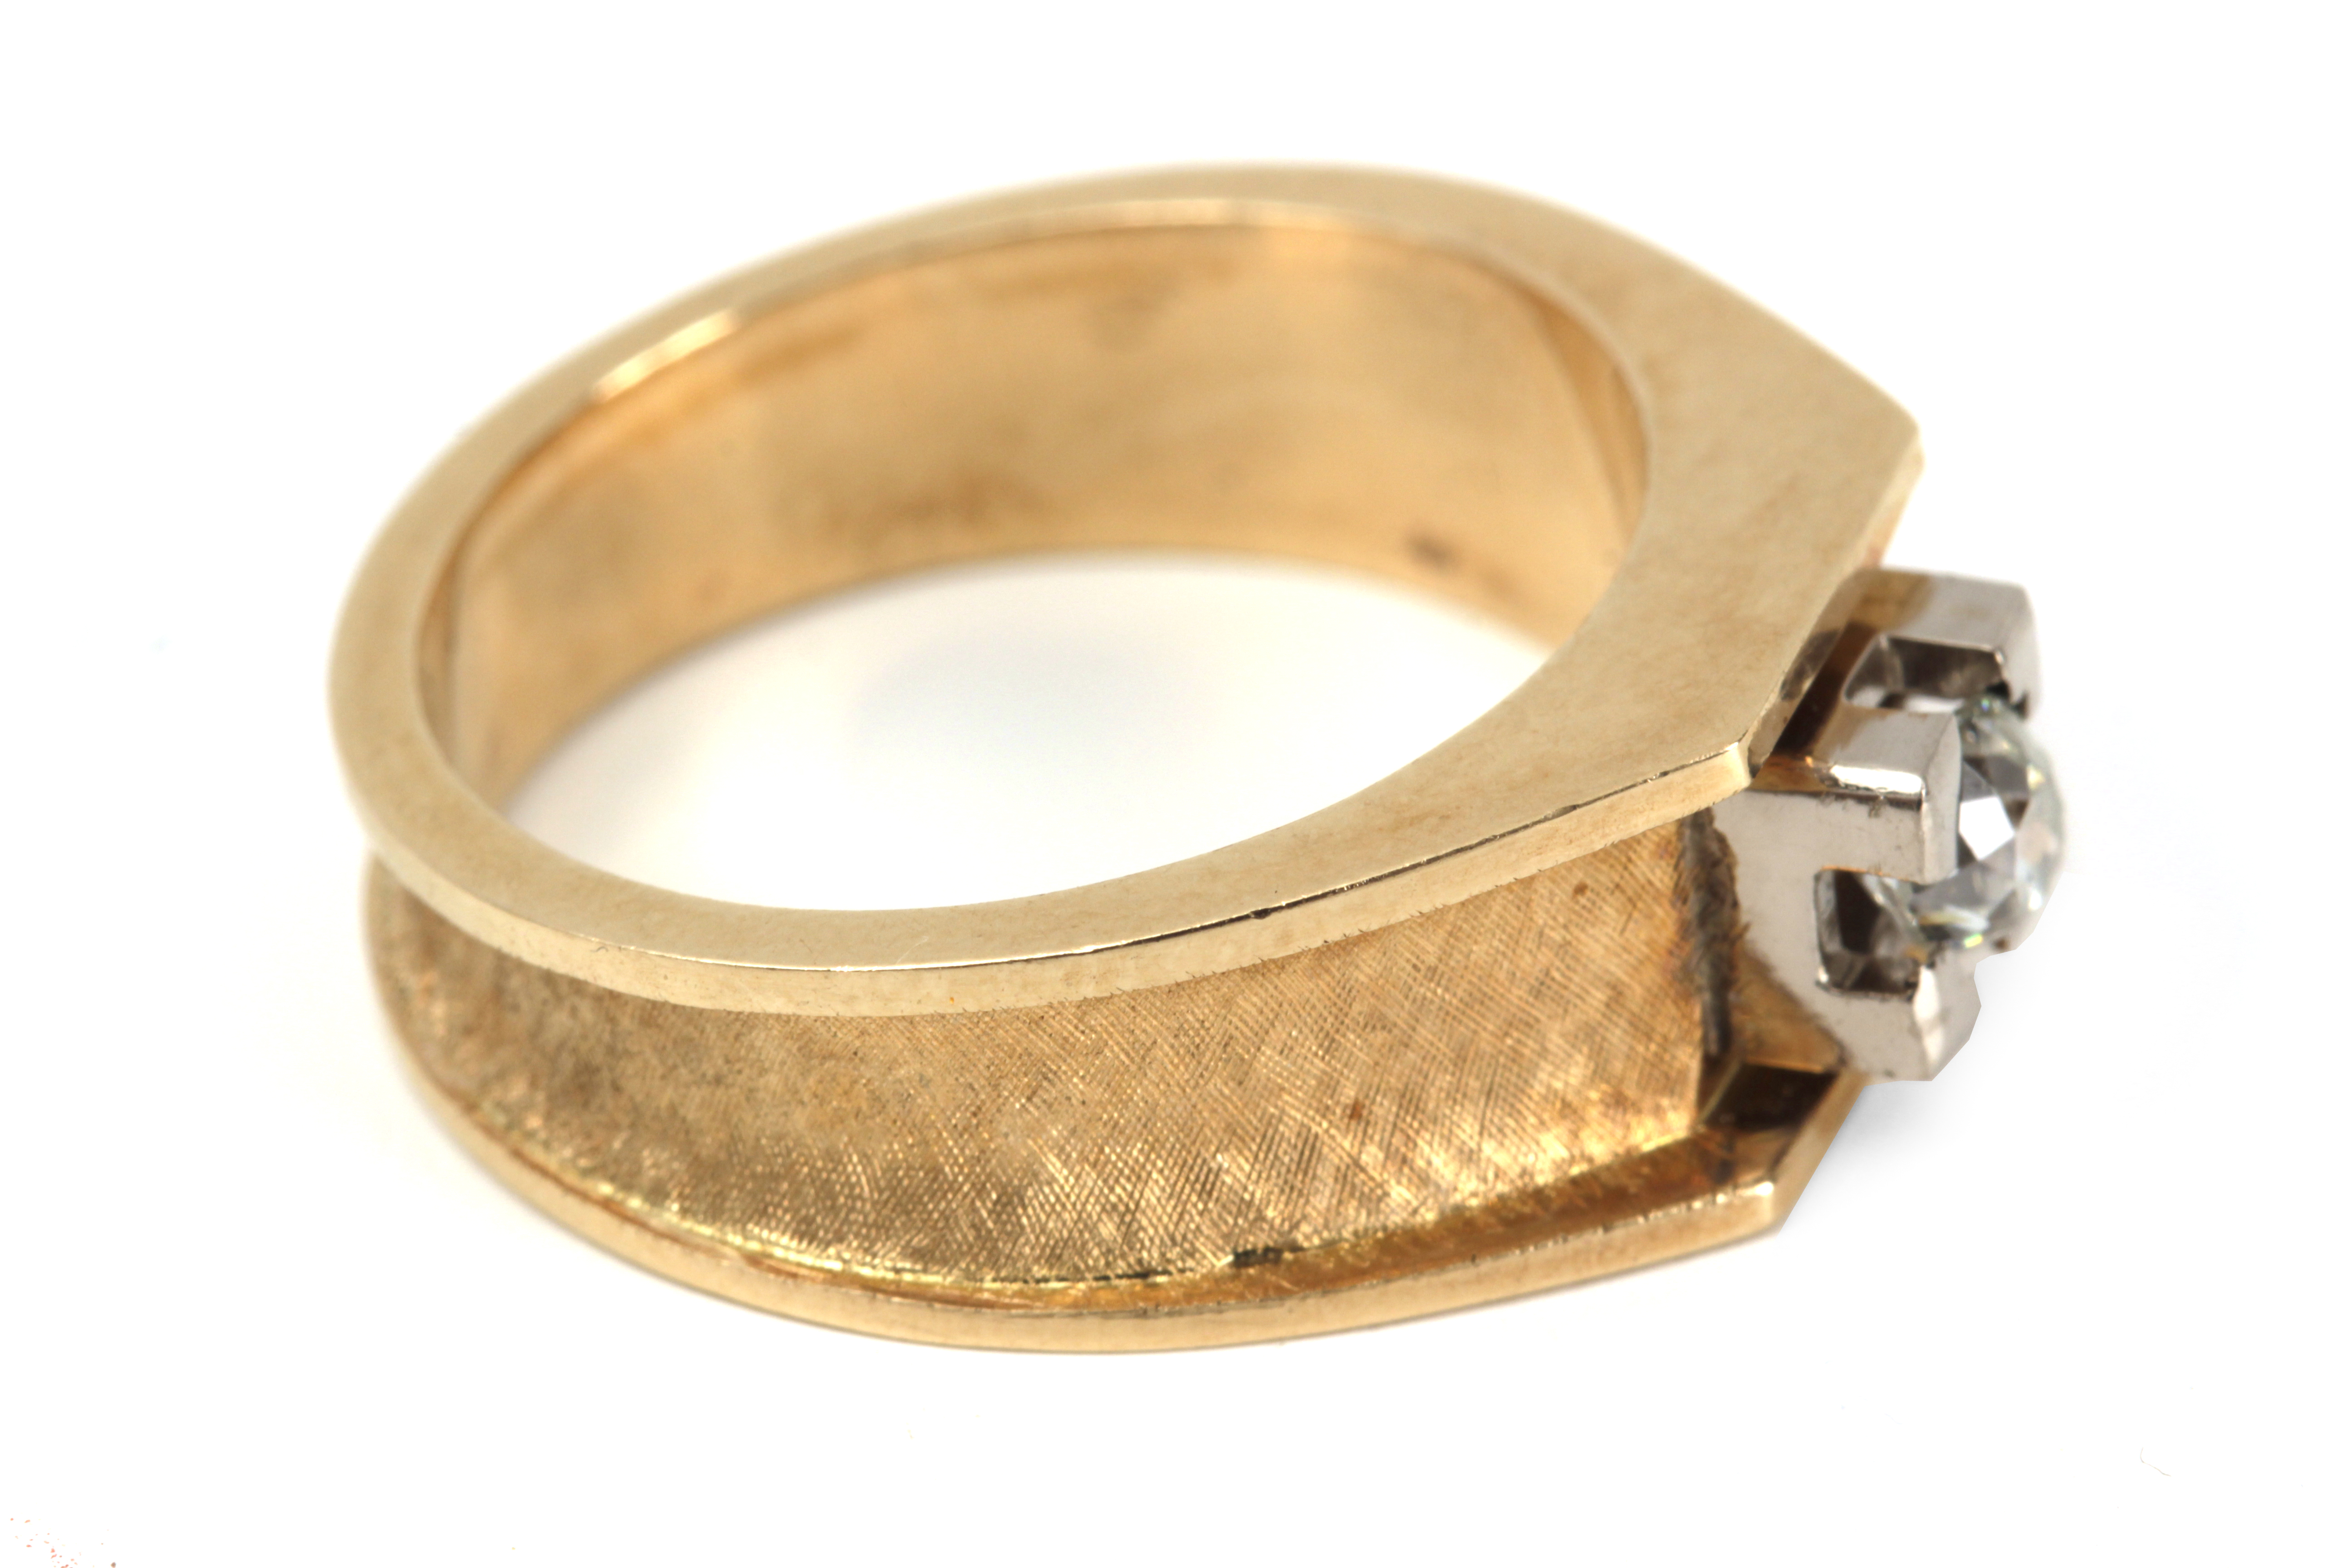 A 0,38 ct. Old European cut diamond solitaire ring with an 18k. yellow gold and platinum setting - Image 2 of 4